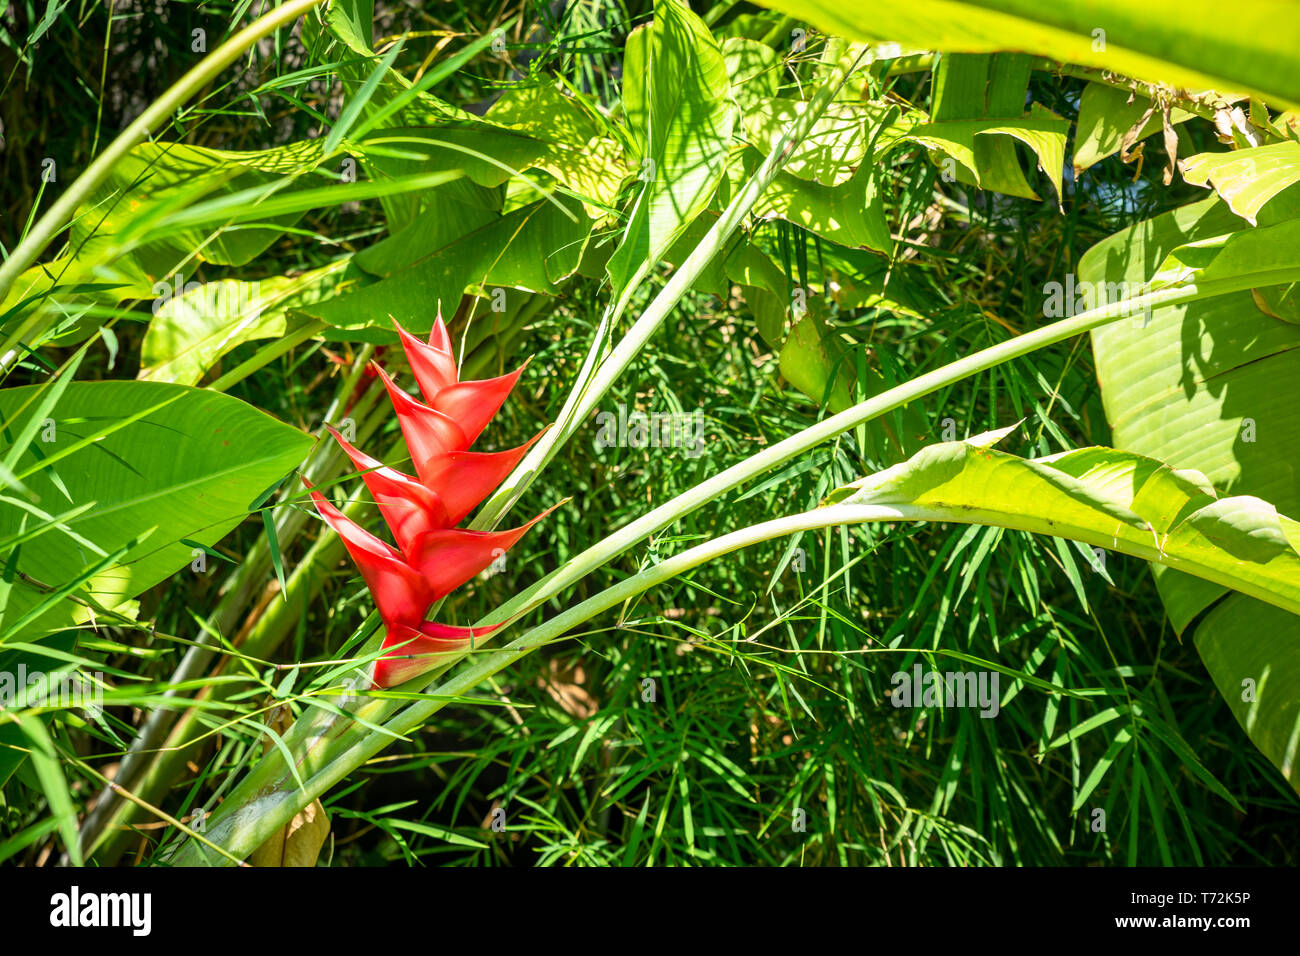 Colorful red flower on a bromeliad plant Stock Photo